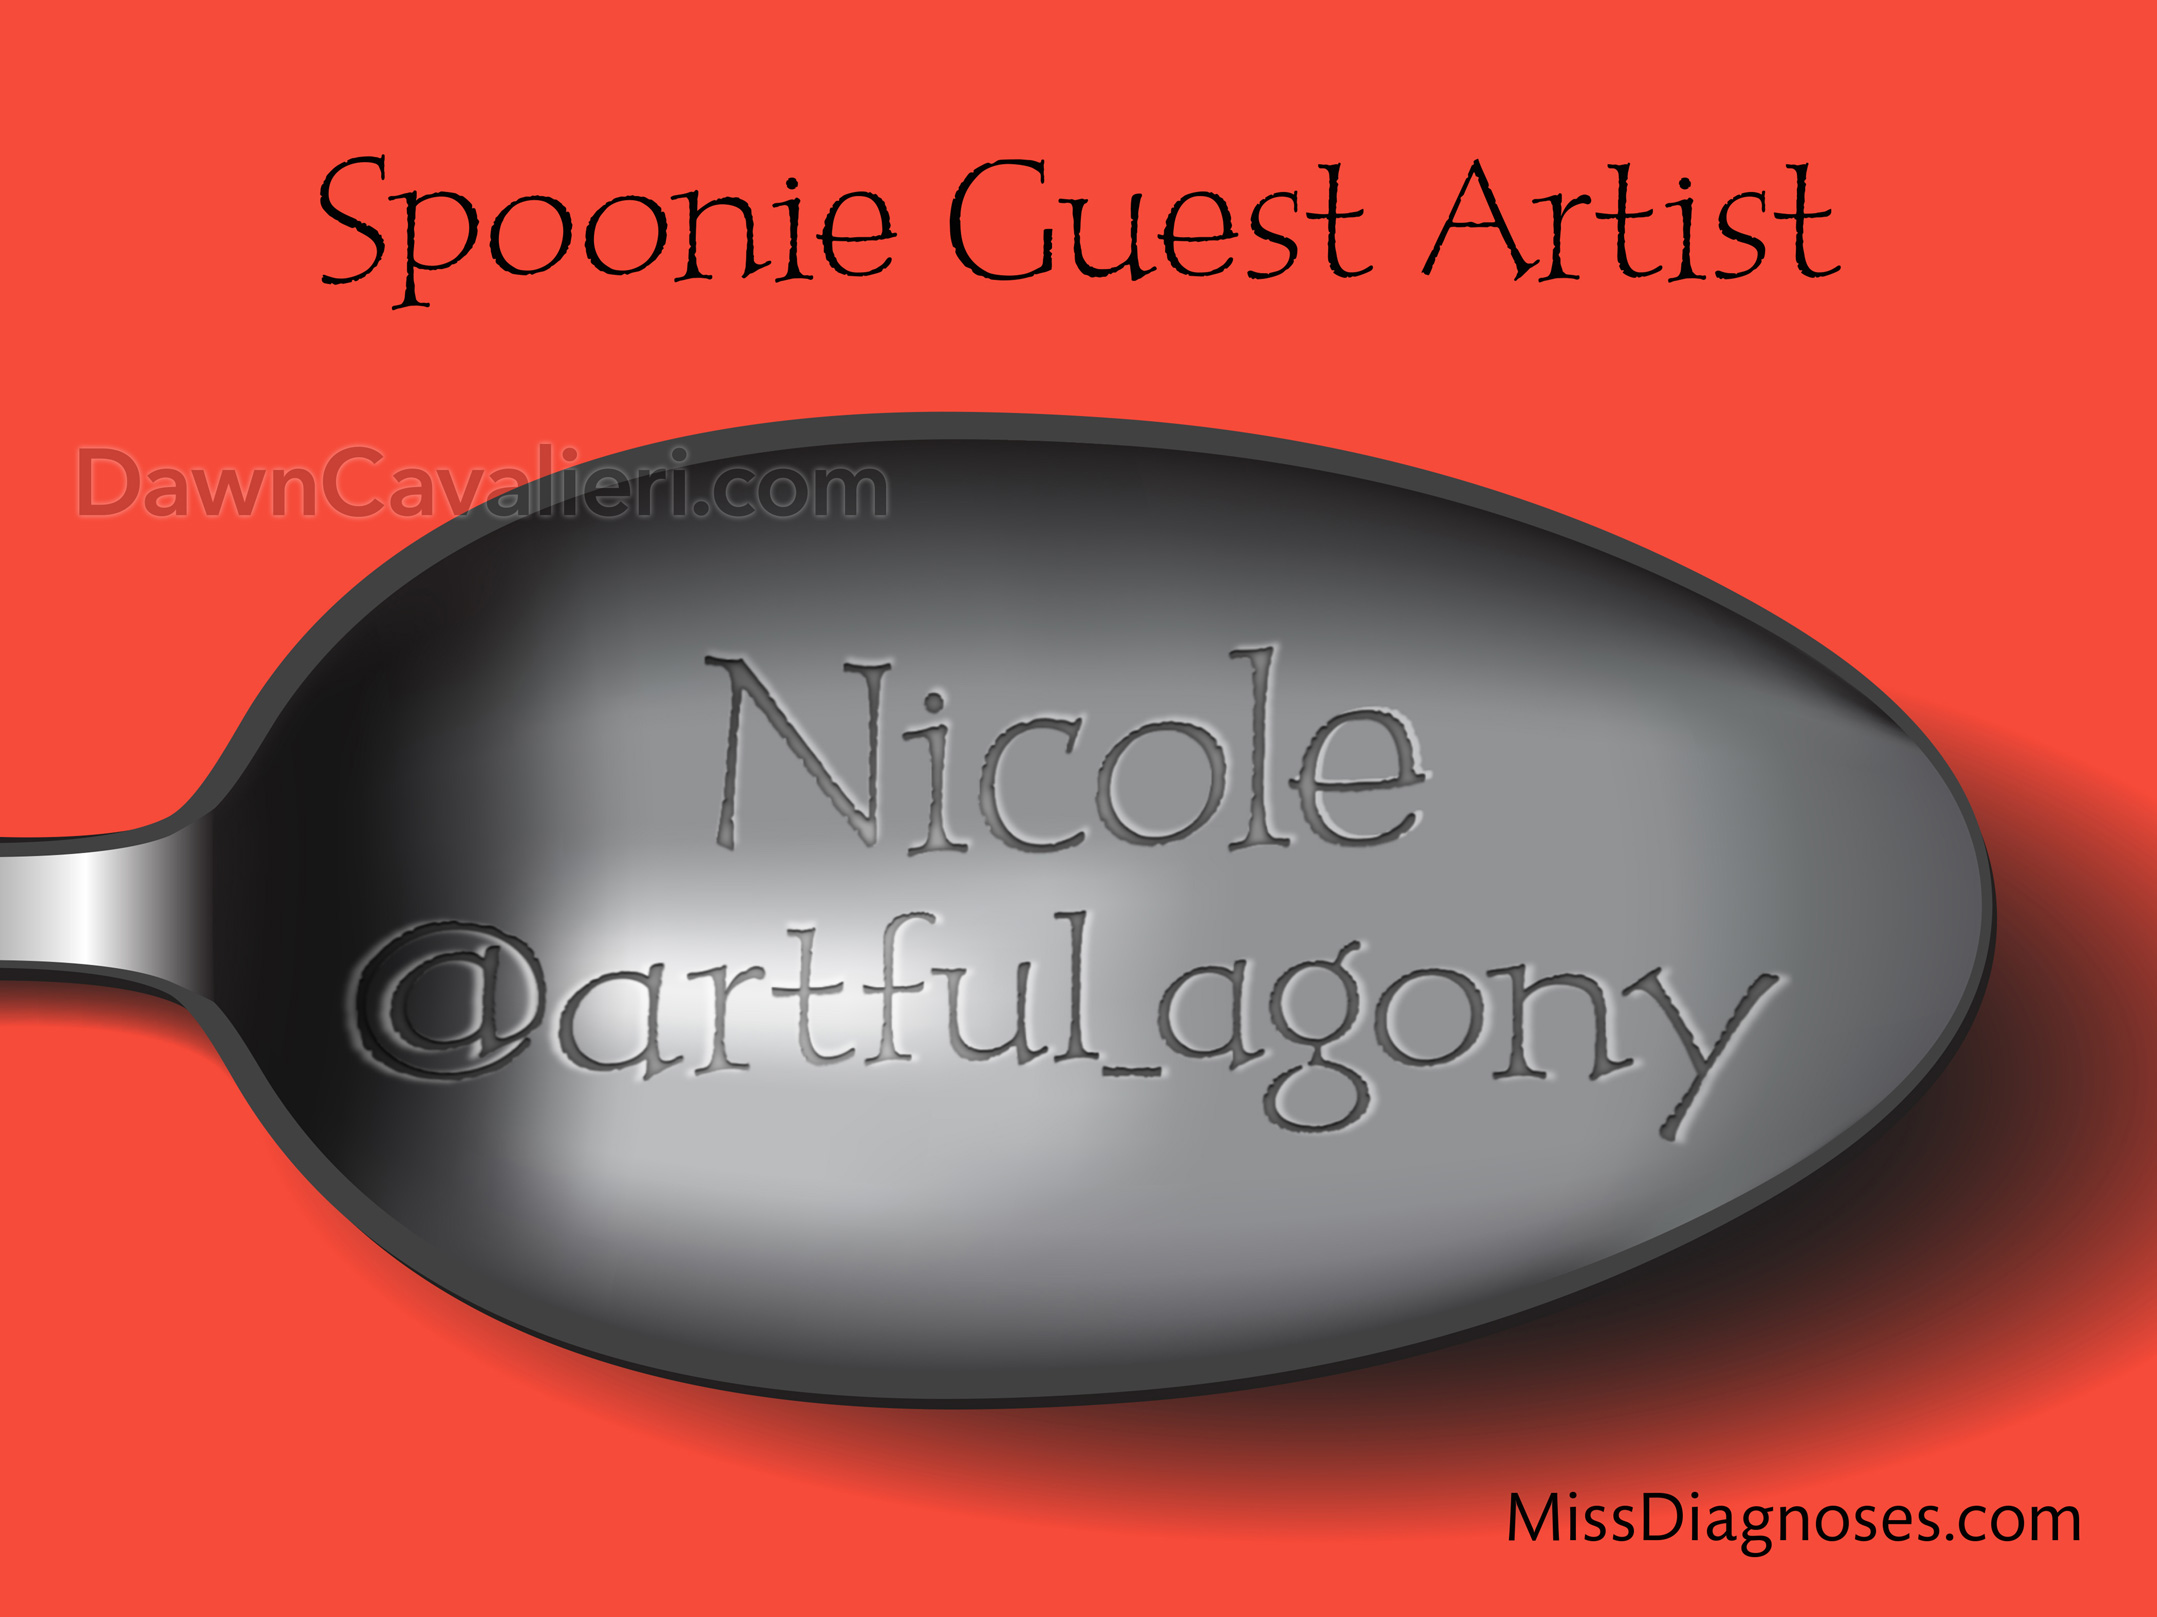 Header image for blog post. The top reads 'Spoonie Guest Artist.' The illustration is of the bowl part of a spoon in silver tones. Running across the bowl, styled to look like engraved type, is the name Nicole @artful_agony. In the lower right corner of the image is the name of the blog: Miss Diagnoses dot com. The background is red. The ratio of the image is roughly 1.3 to 1.